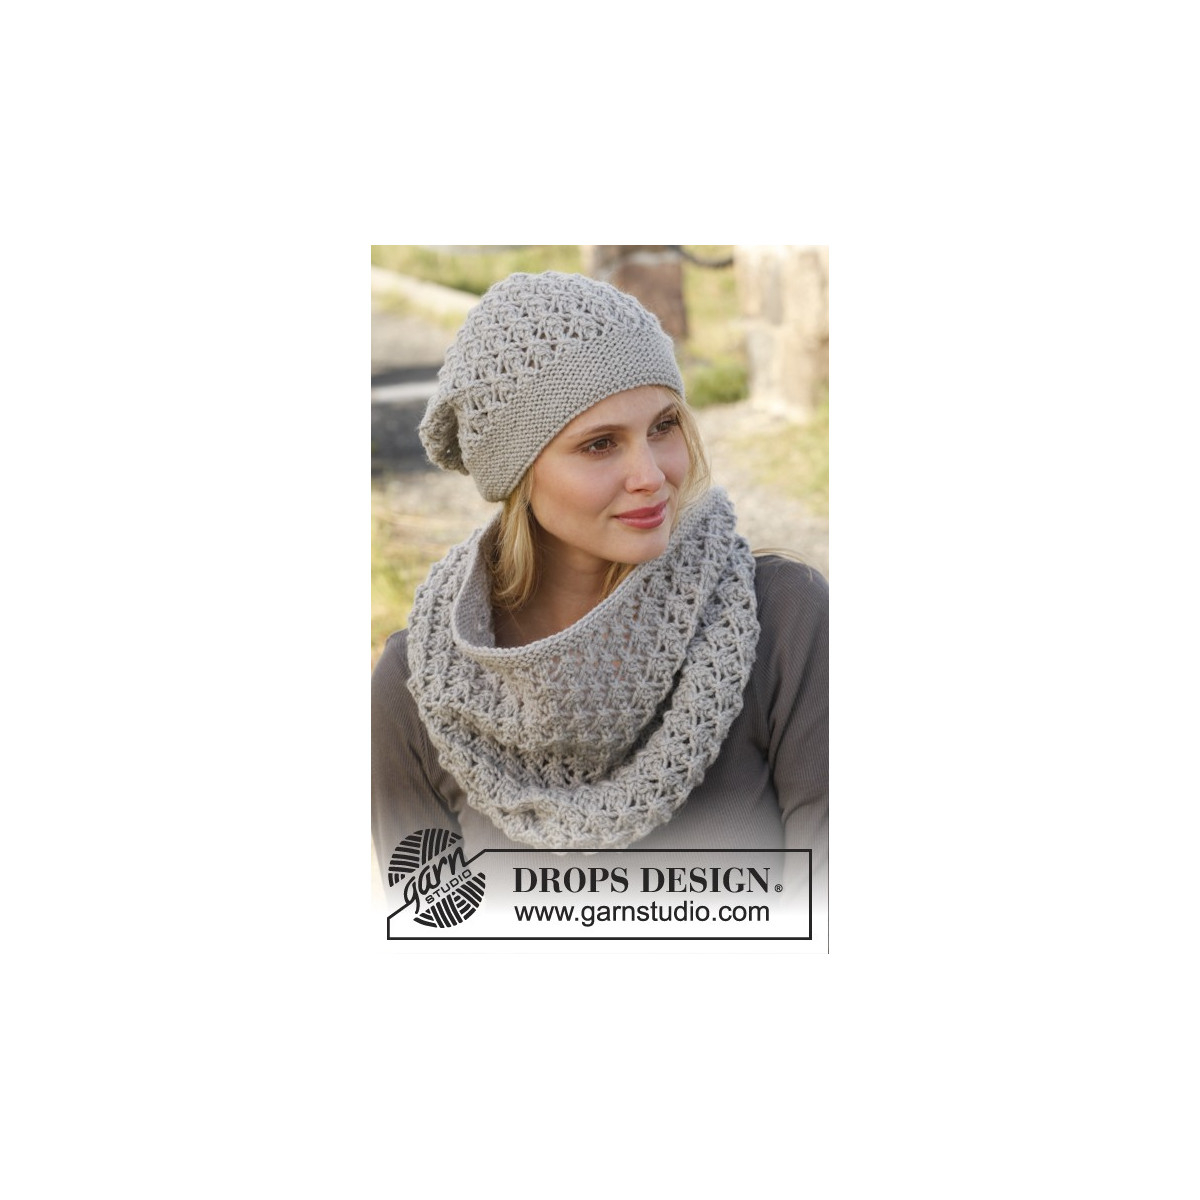 Drops Knitting Patterns Autumn Mist Drops Design Knitted Neck Warmer And Hat Pattern